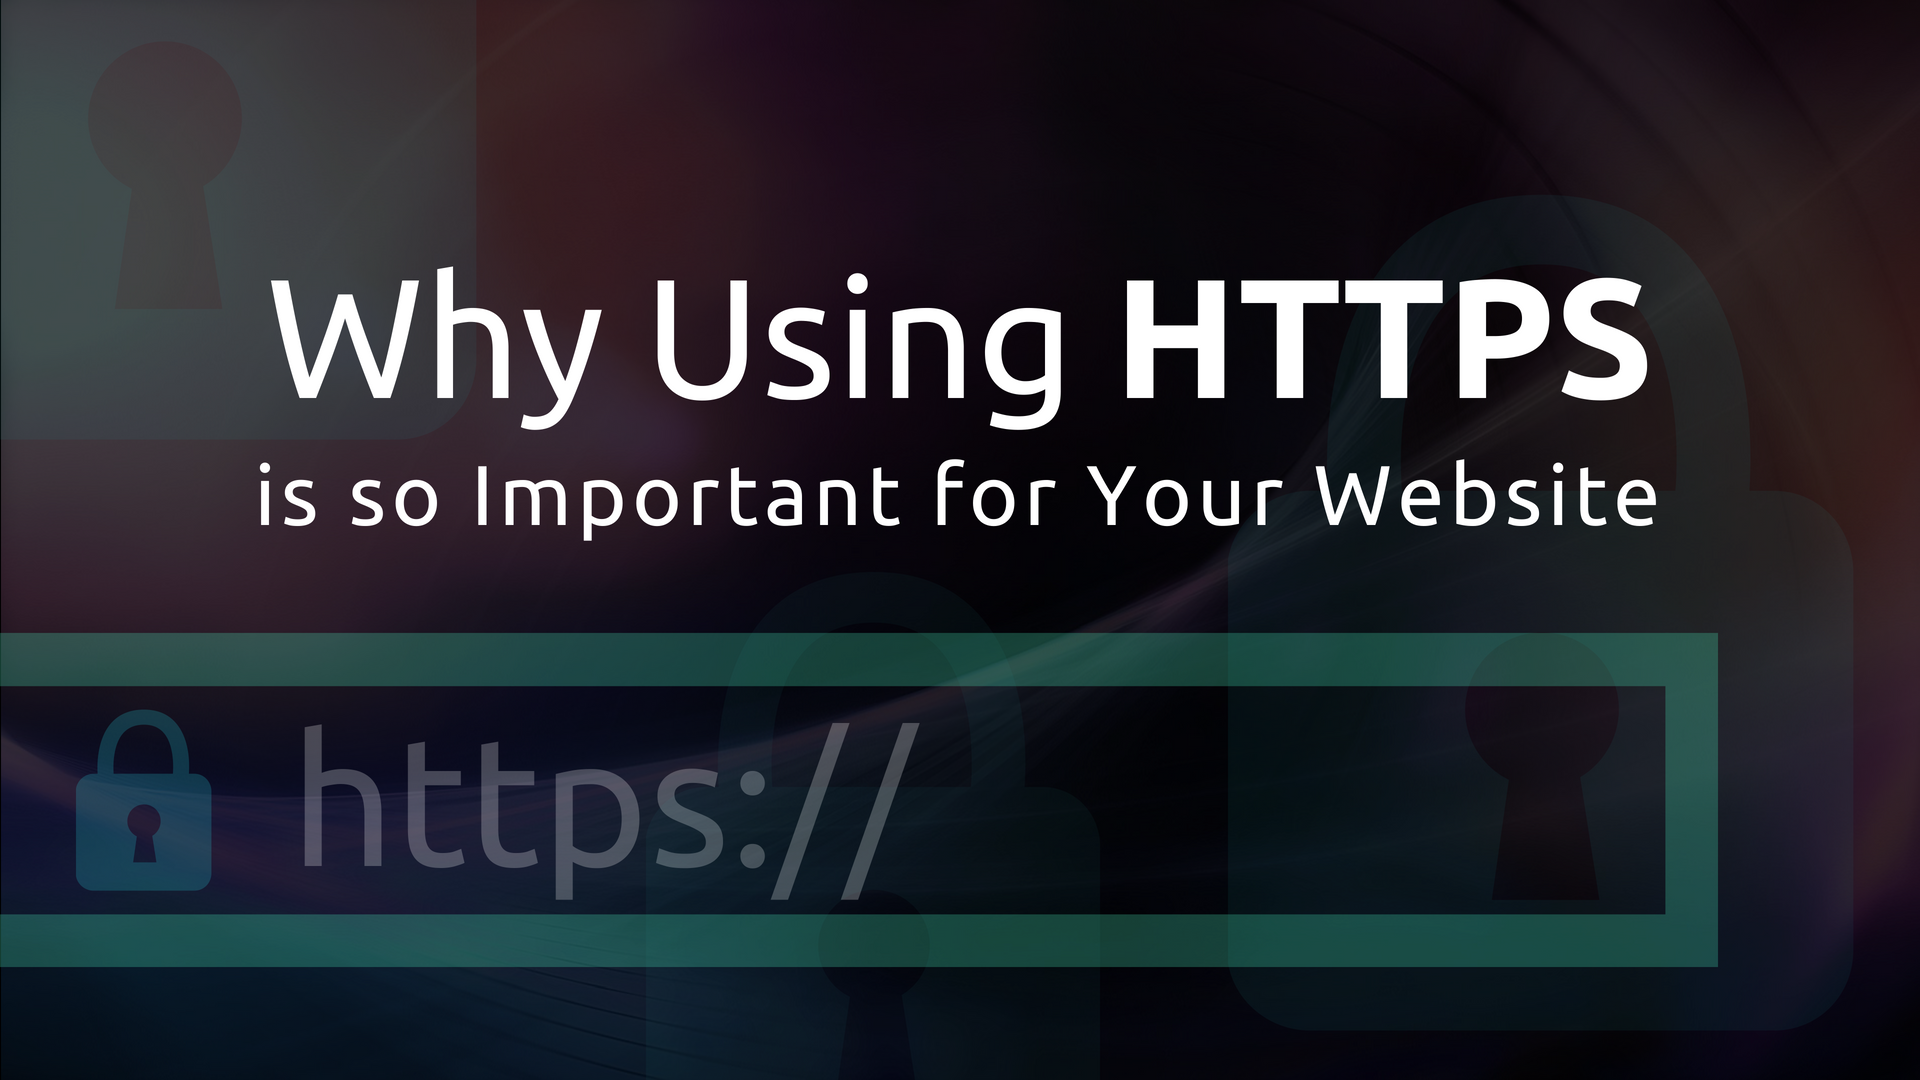 Why Using HTTPS is so Important for Your Website